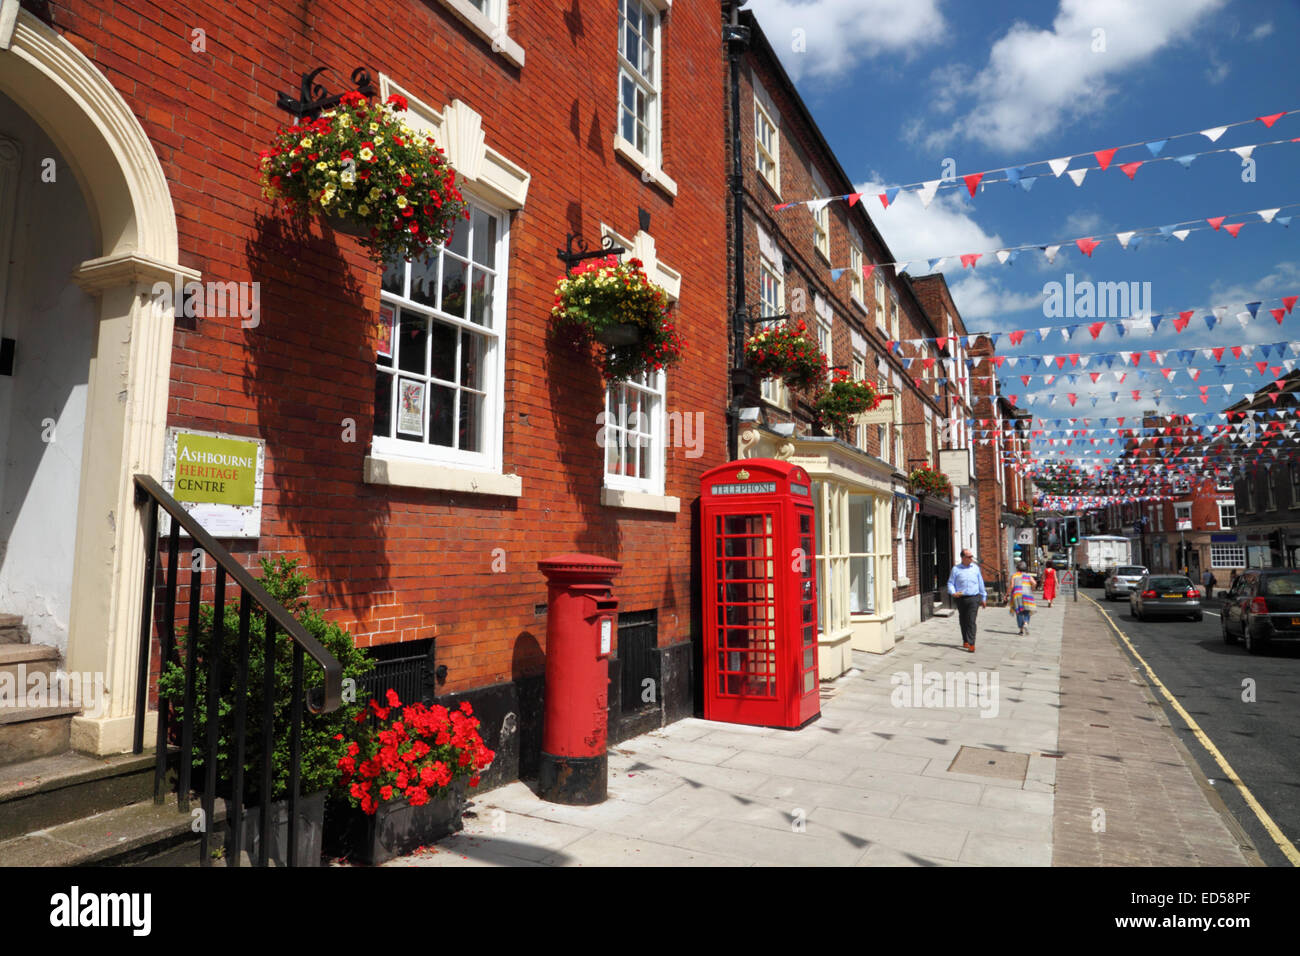 A street of an English town with red brick buildings, bunting, a red telephone box, and a pillar box. Stock Photo